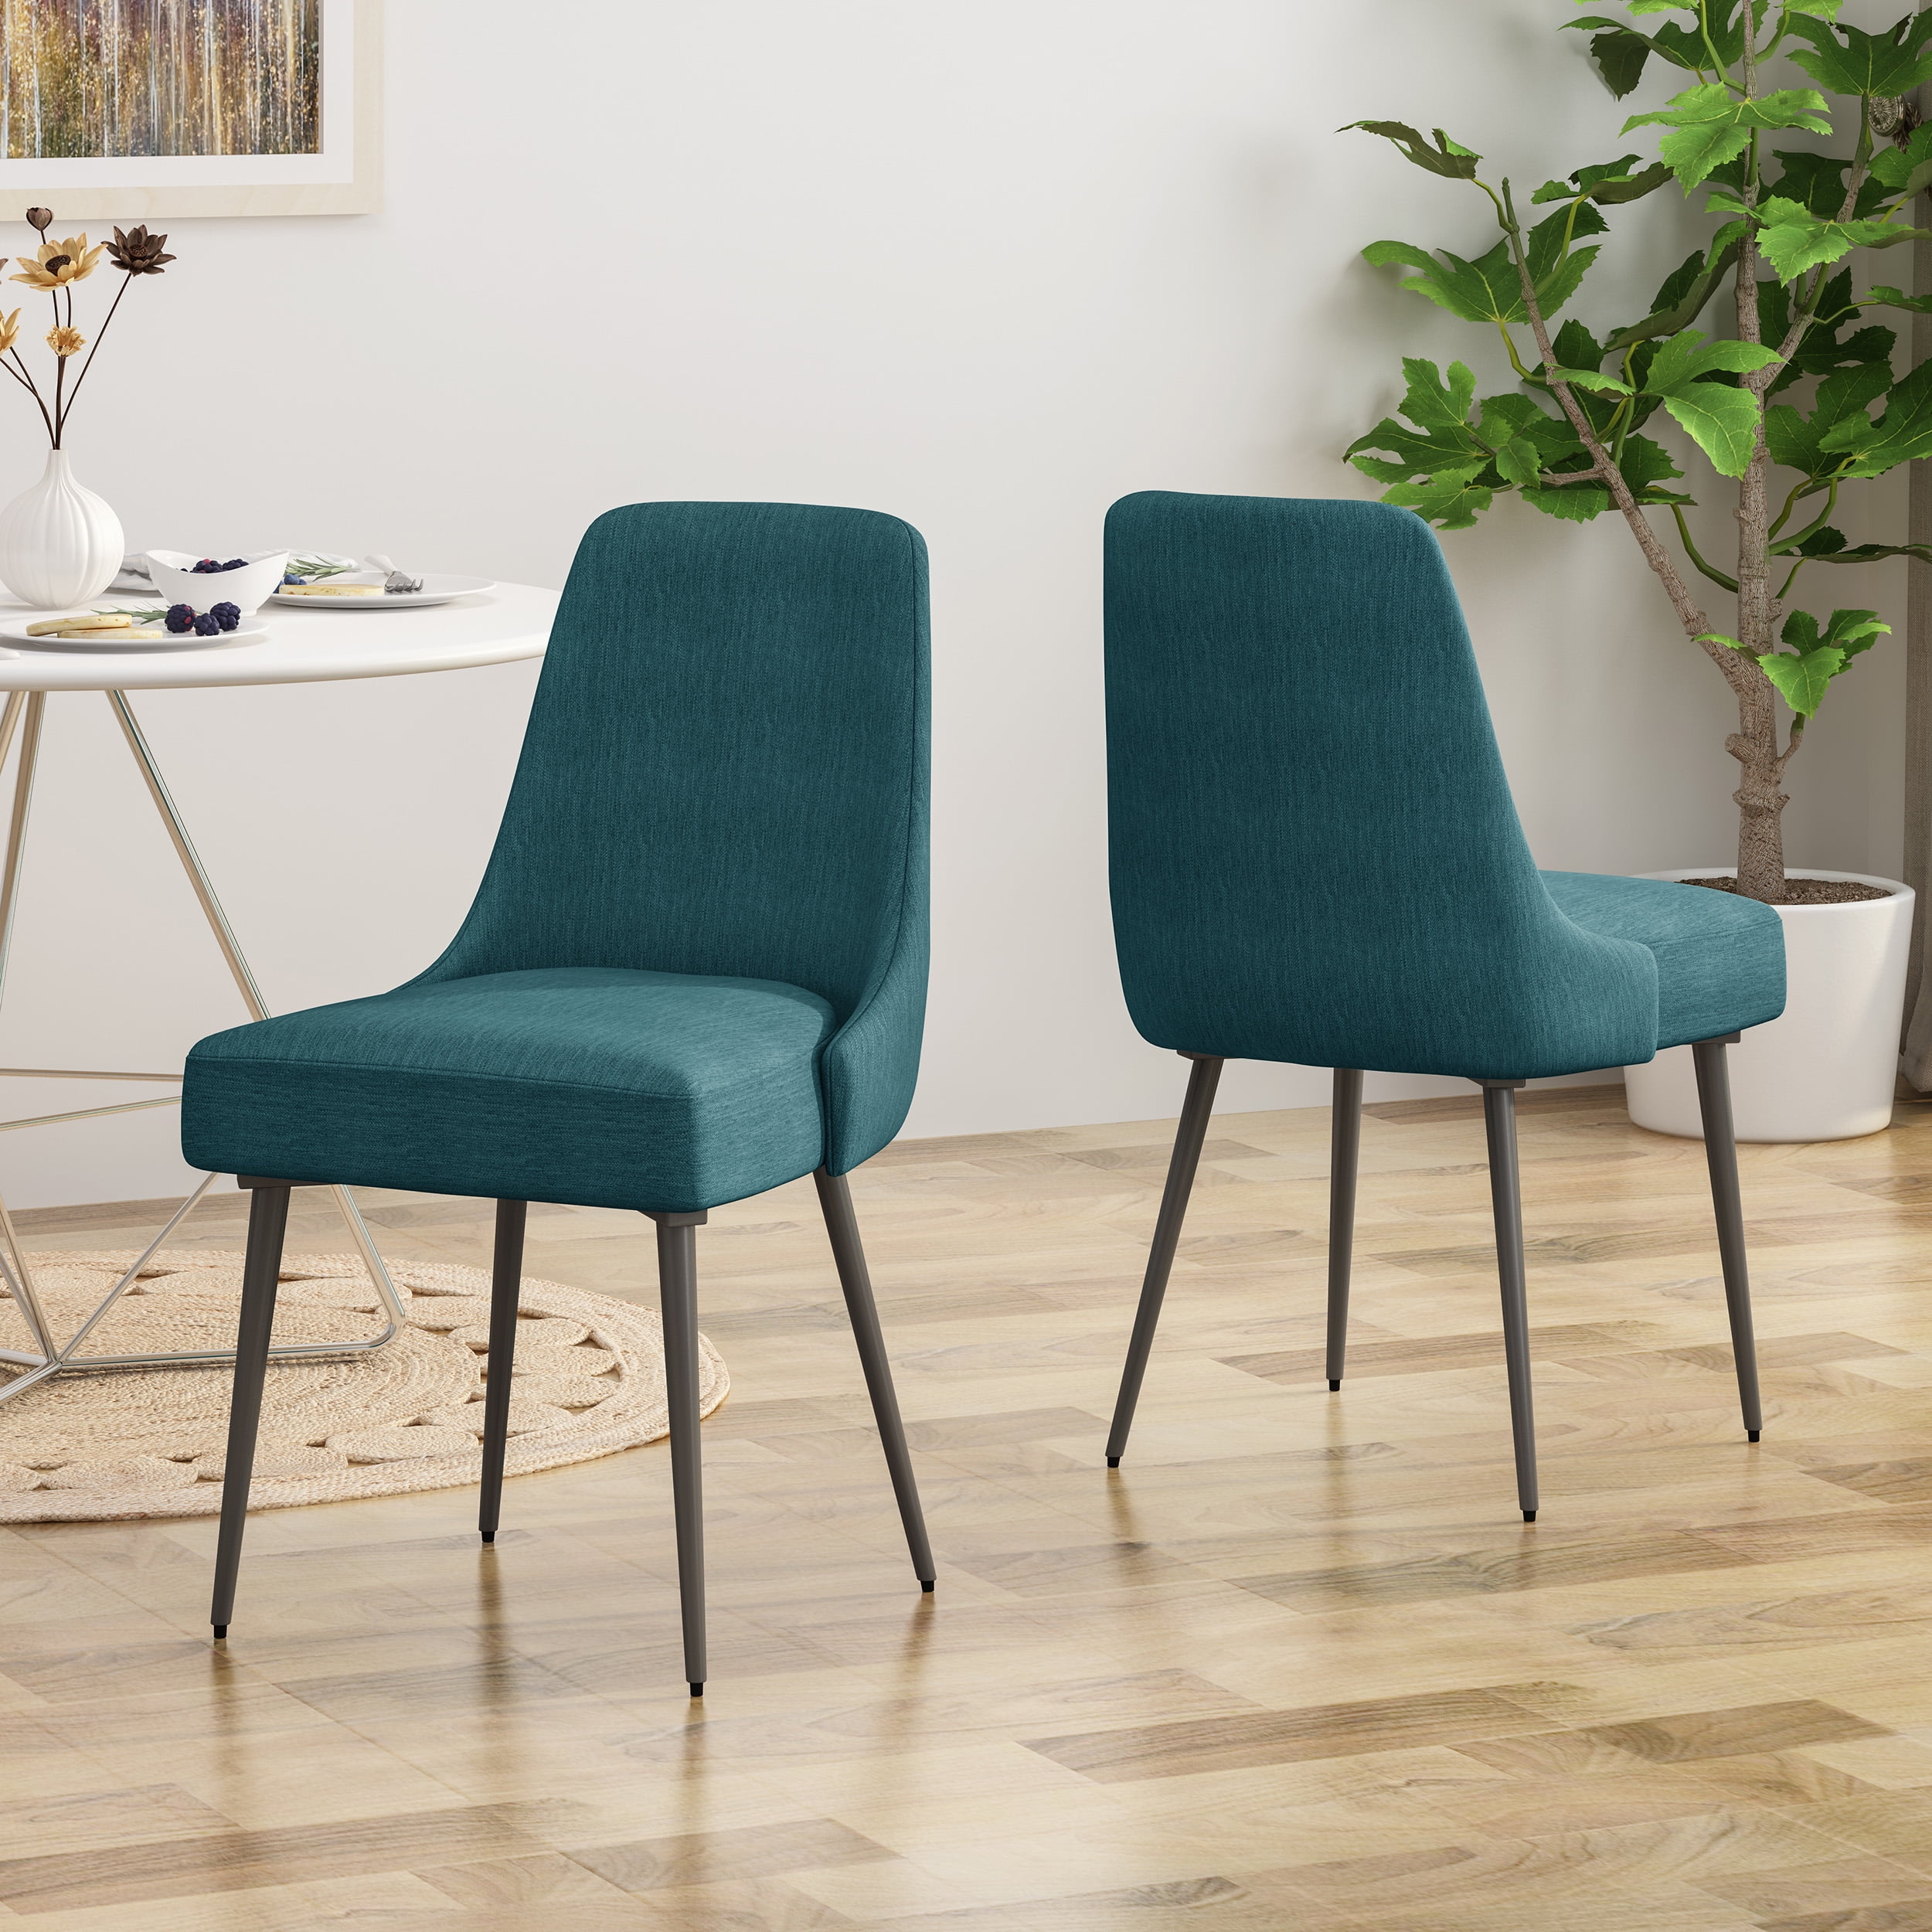 Noble House Scott Modern Fabric Dining Chairs, Set of 2, Teal - Walmart